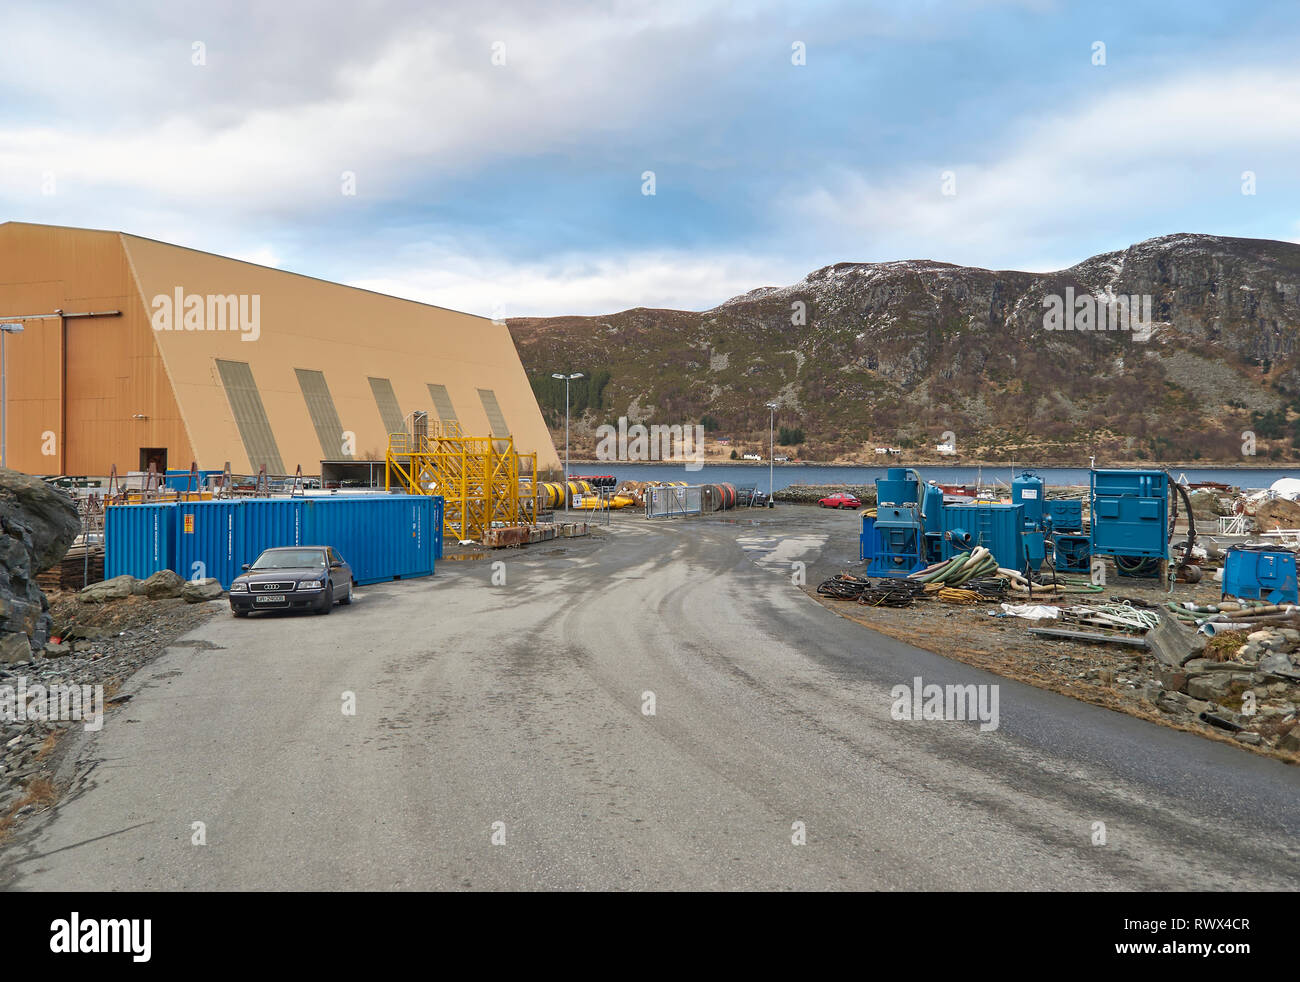 The entrance into the Batbygg Shipyard in Maloy in Norway, with the Storage Areas full of Industrial Equipment. Maloy, Norway. Stock Photo